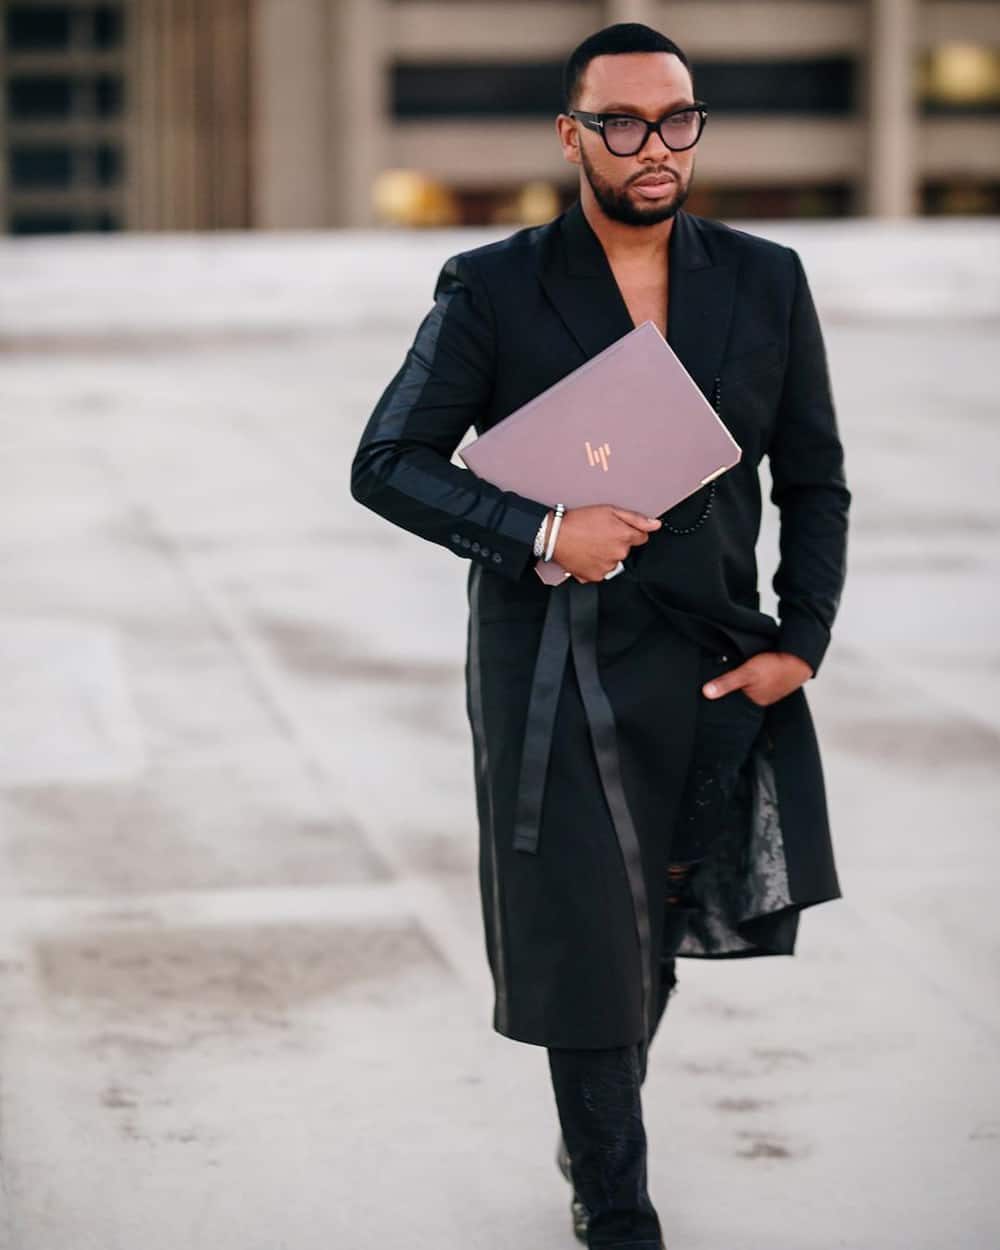 David Tlale biography: age, place of birth, partner, married, mother, designs and net worth